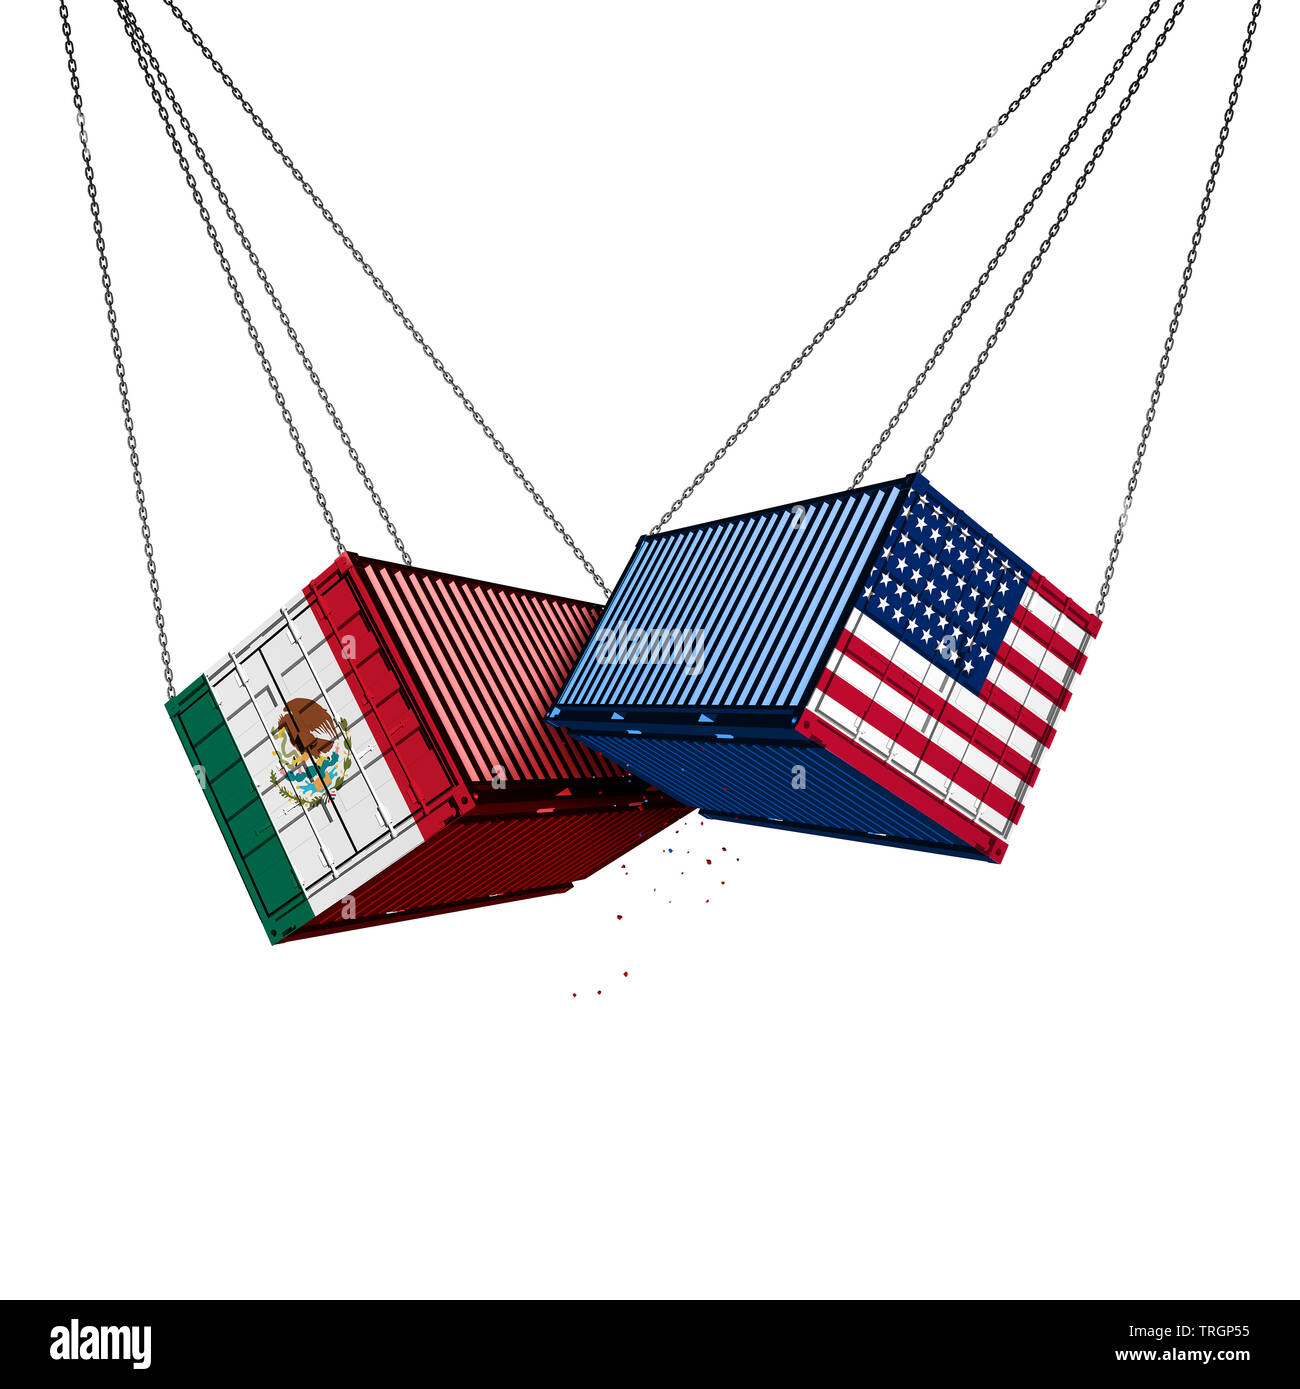 Mexico US trade war and American tariffs as two opposing cargo freight containers in conflict as an economic dispute over import and export taxes. Stock Photo